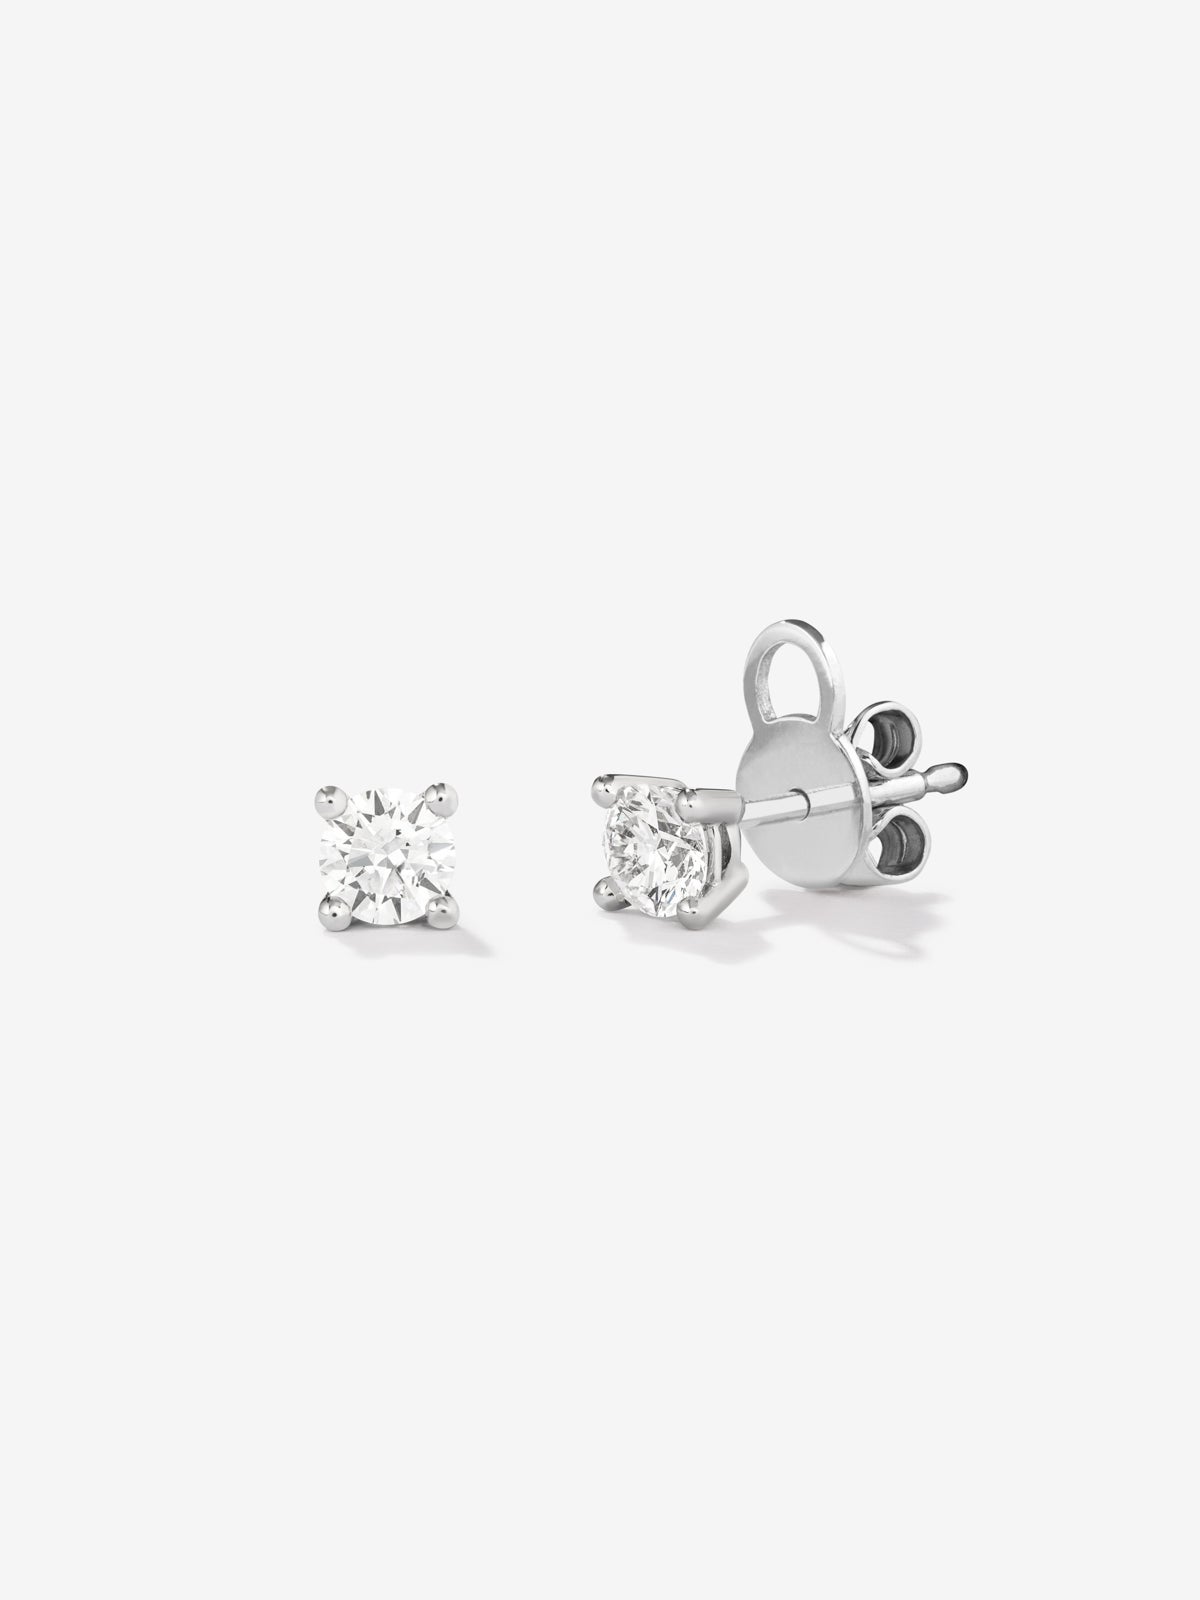 18K white gold solitaire earrings with 2 brilliant-cut diamonds with a total of 0.06 cts